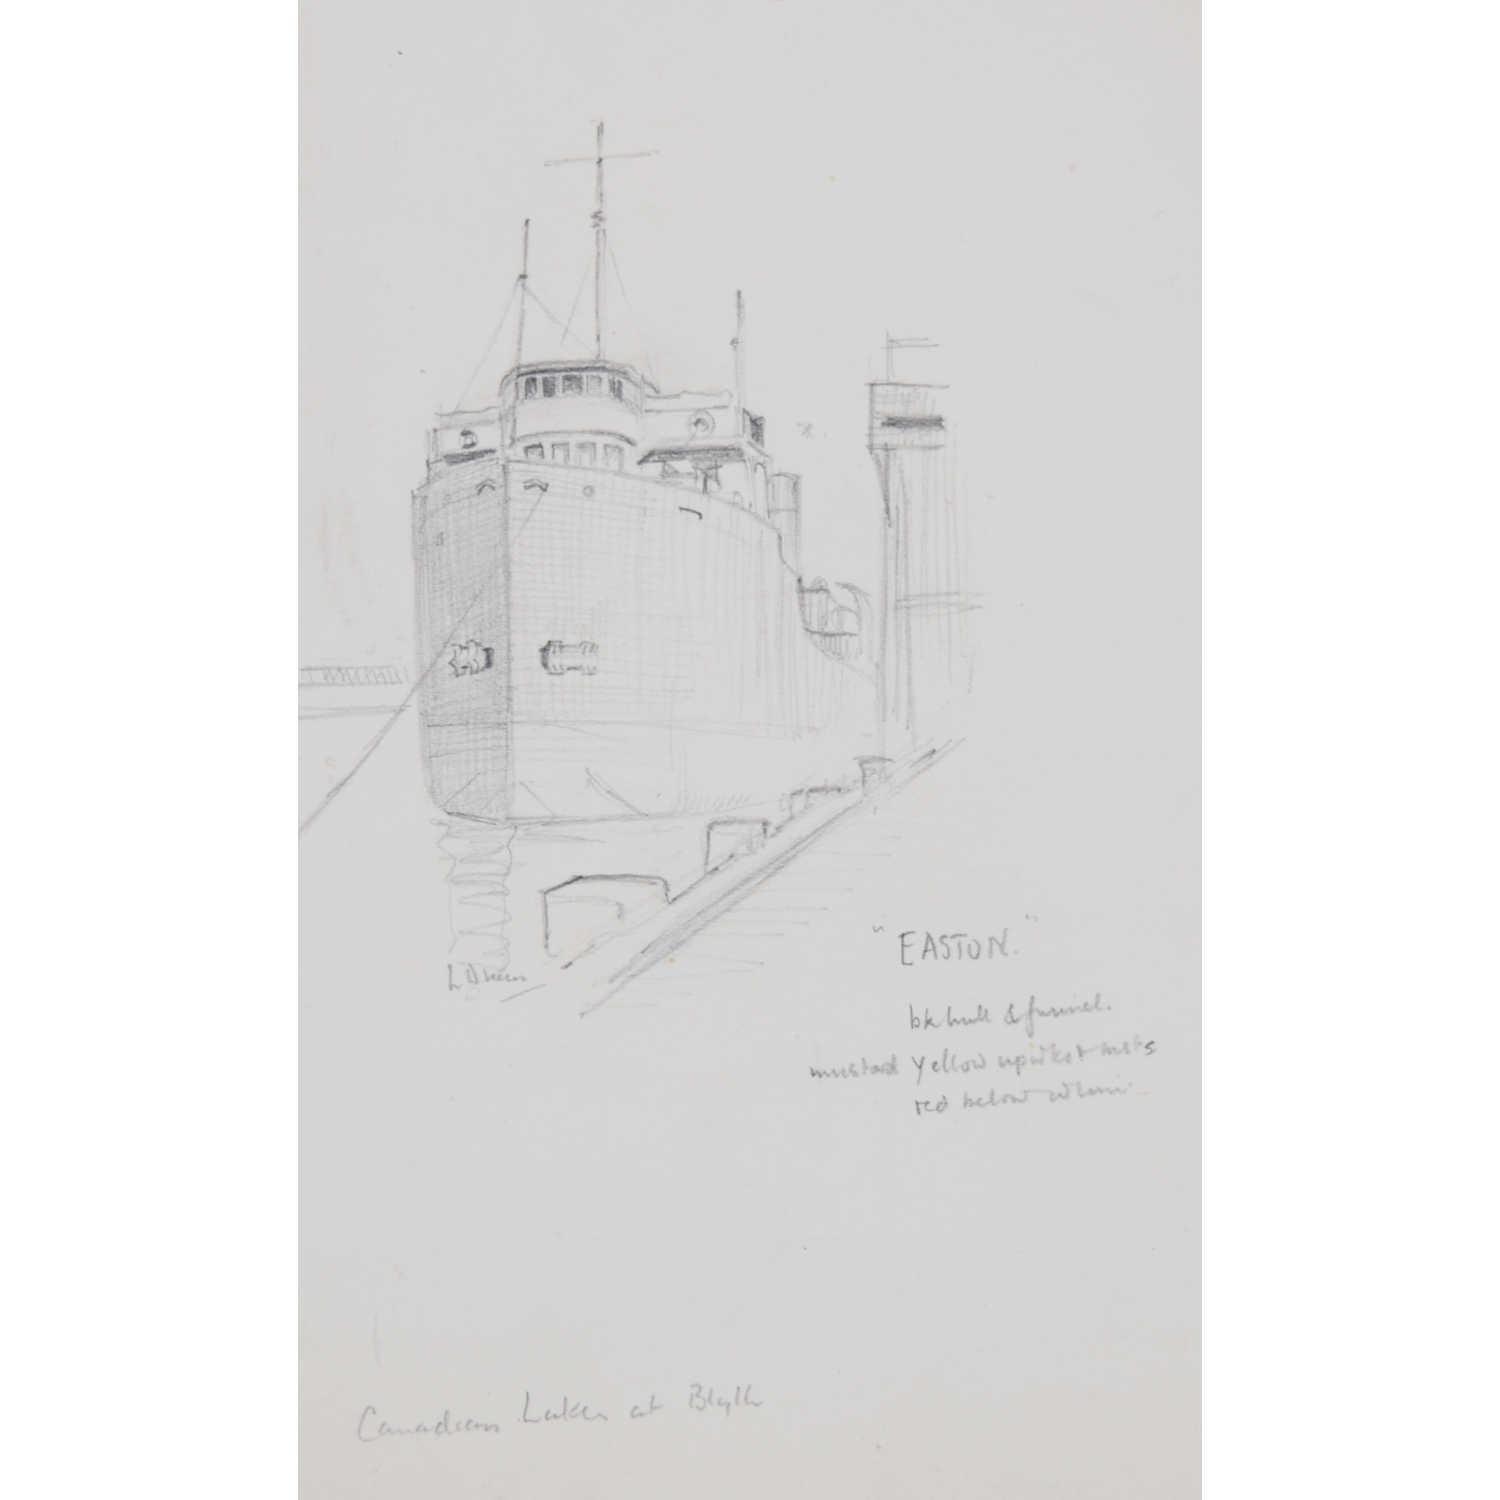 Laurence Dunn Drawing of the 'Easton' Canadian laker steamer (c.1950s) 